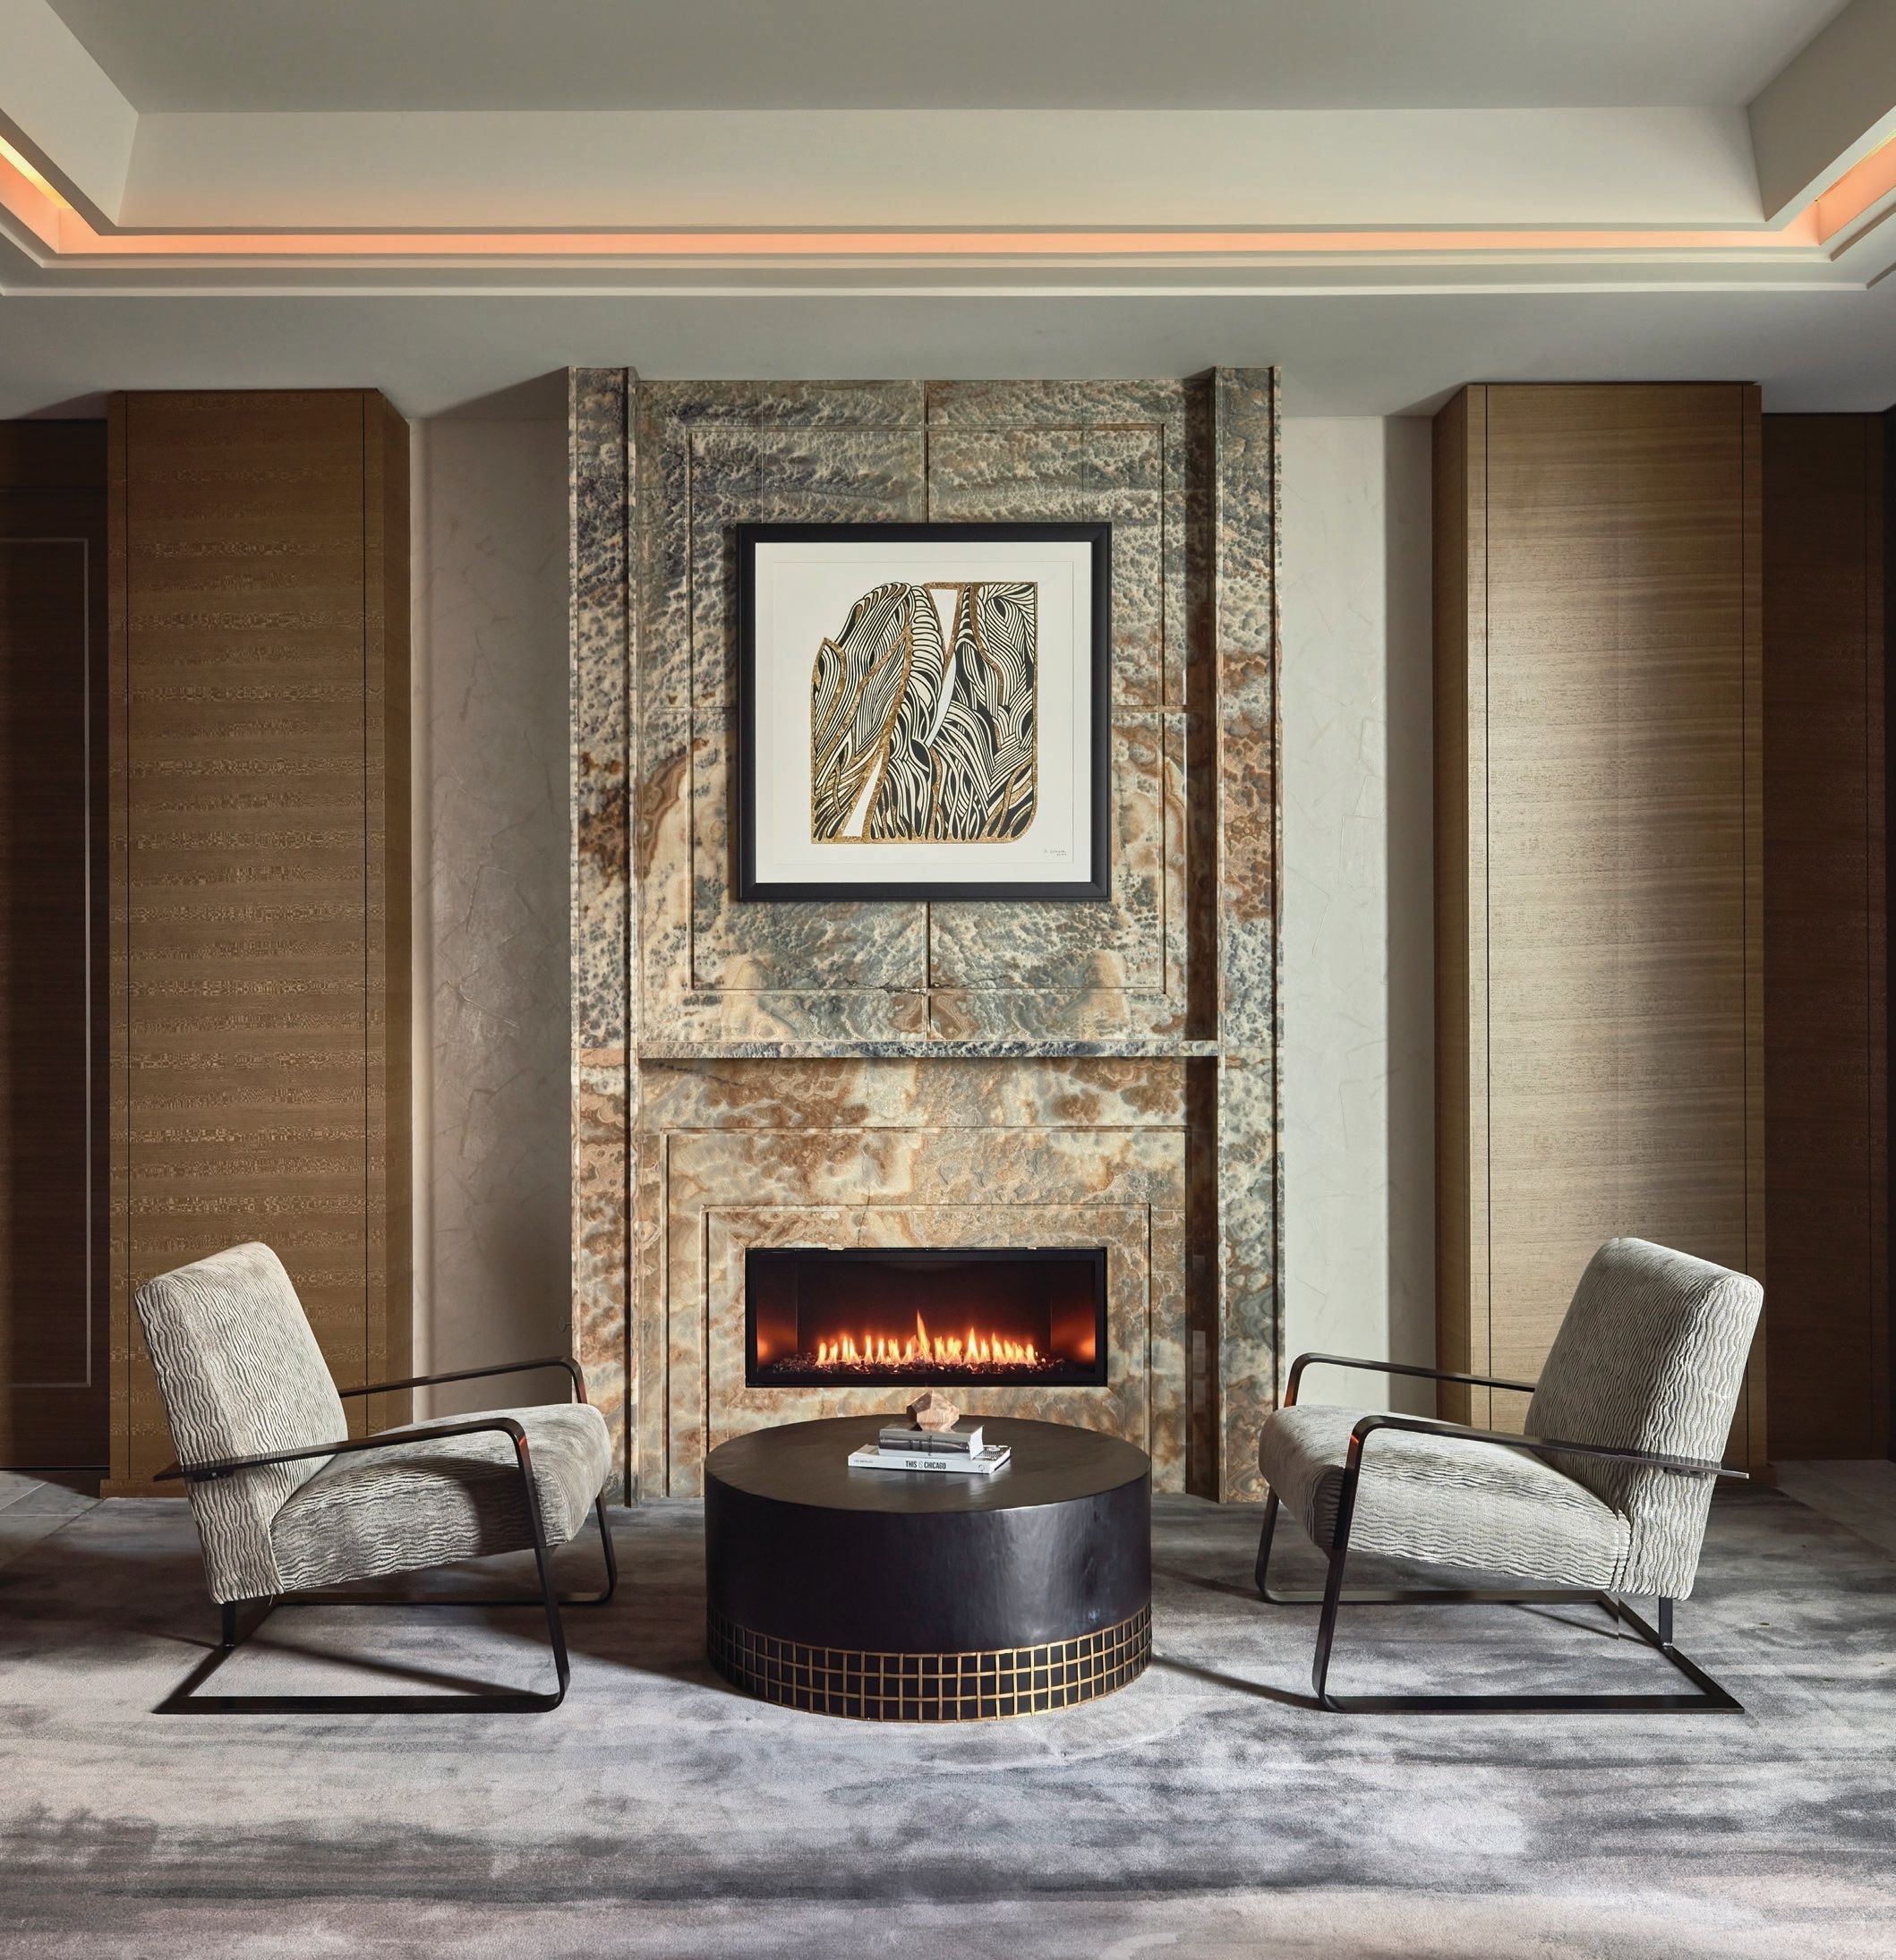 The presidential suite pairs neutral tones with organic shapes plus metallic and stone details to create a sense of contemporary urban sophistication. Photographed by Mike Schwartz